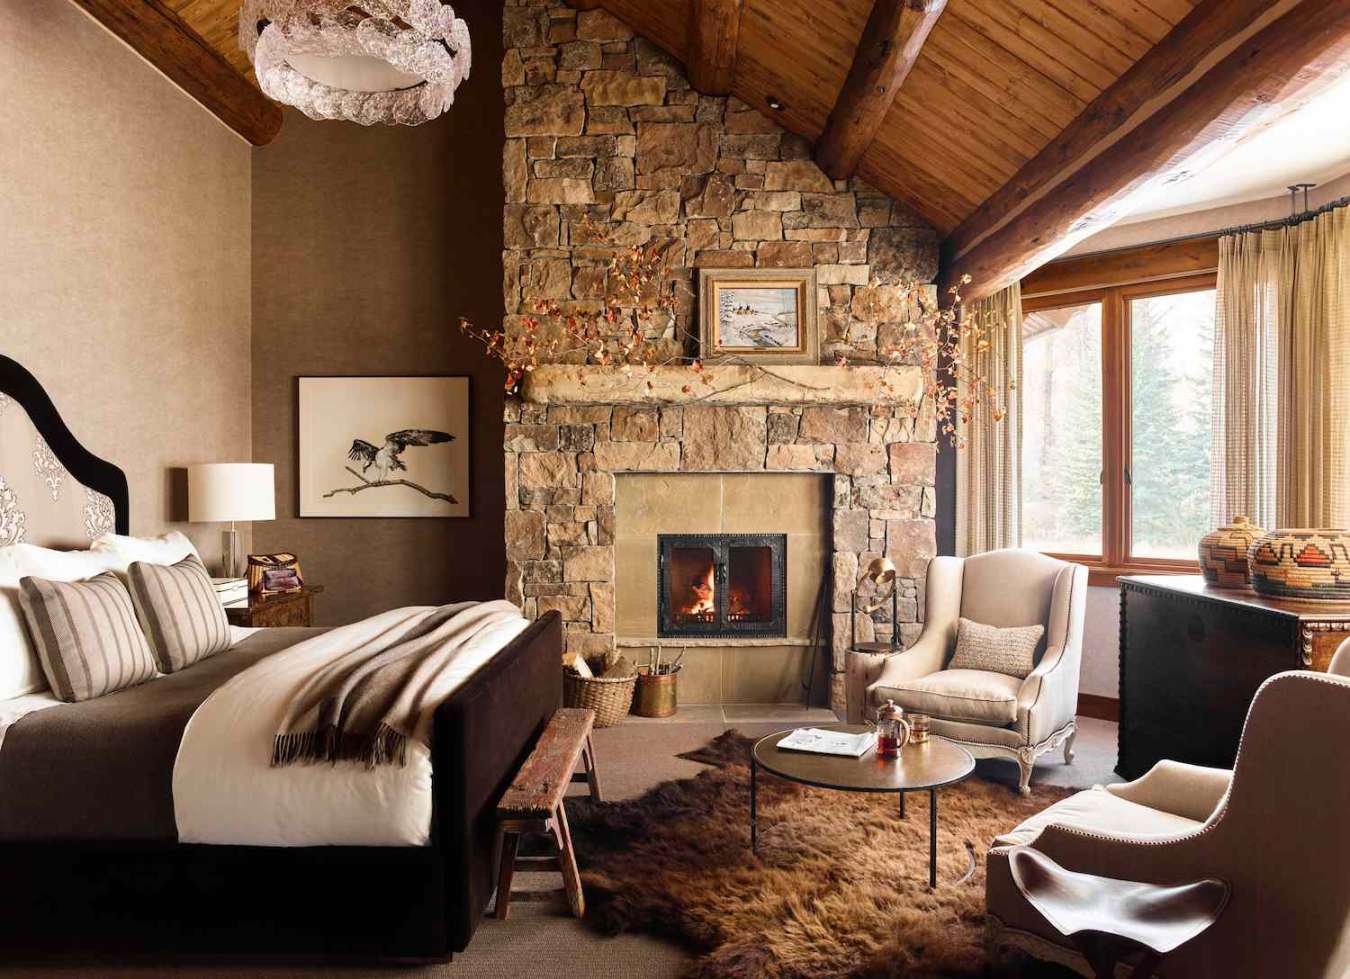 Bedroom Fireplace Ideas to Light Up Your Life